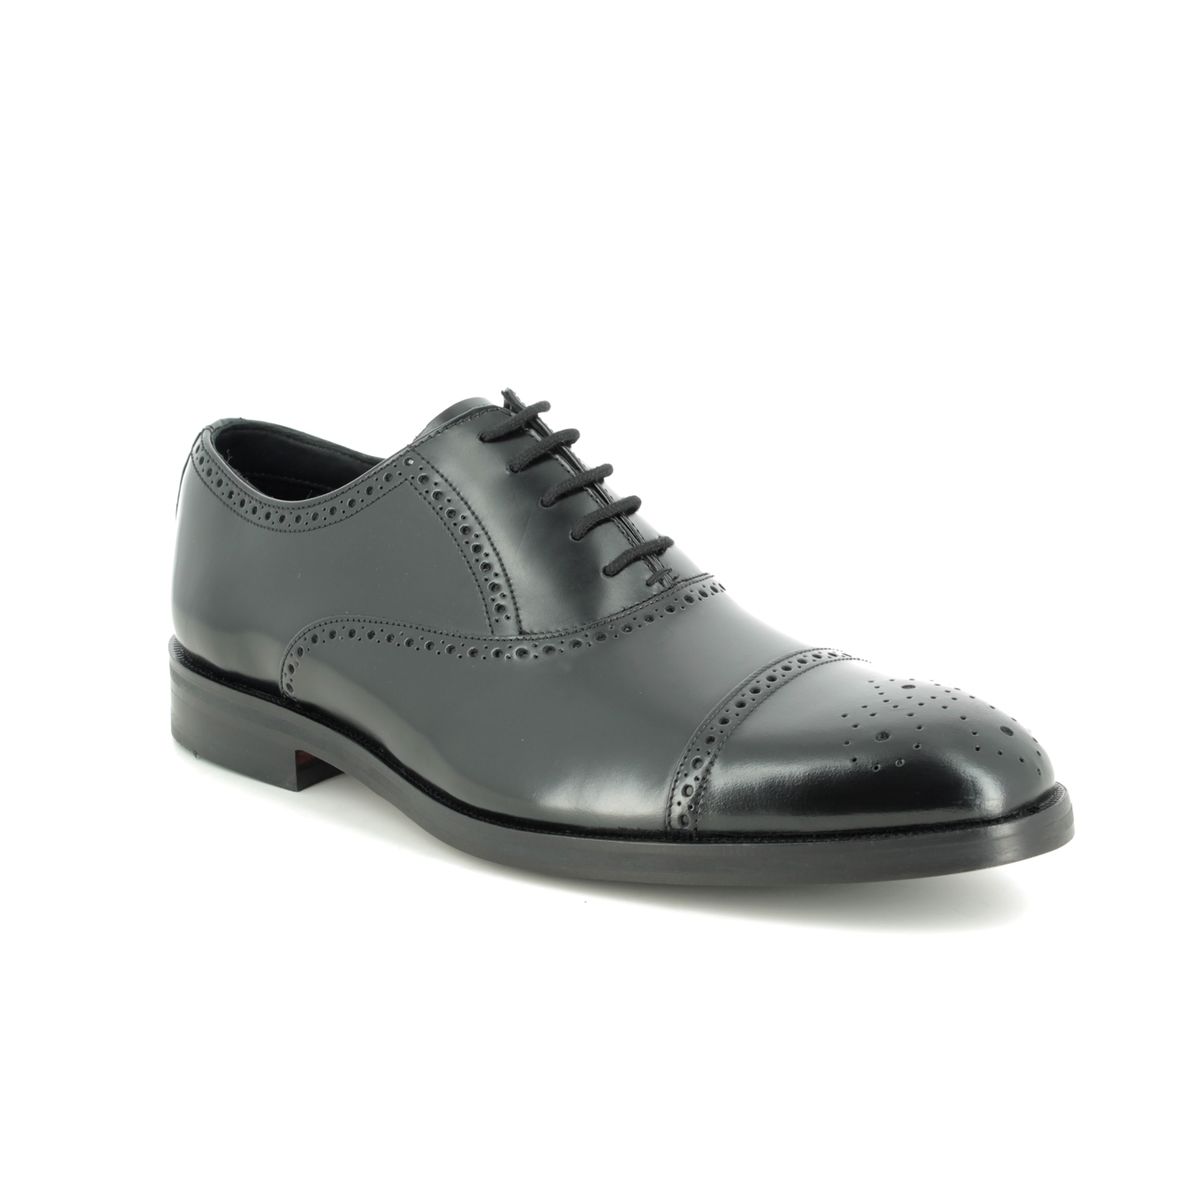 Clarks Oliver Limit Black leather Mens Brogues 4364-67G in a Plain Leather in Size 7